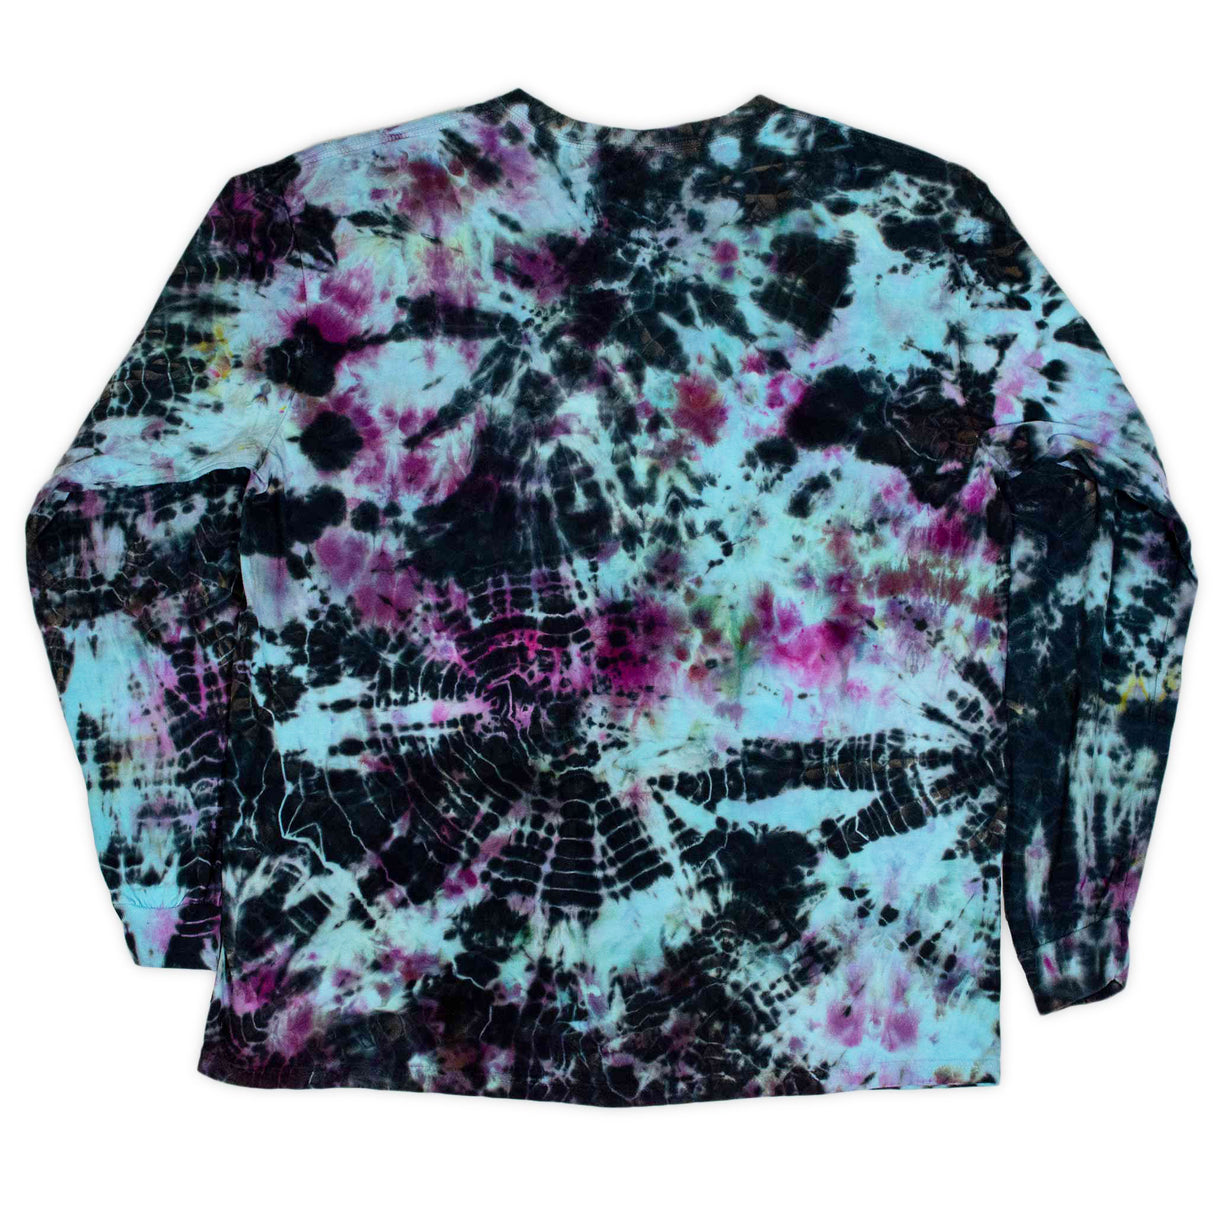 Long-sleeved t-shirt featuring a dual tie-dye technique, with intricate patterns of black crackle and bursts of pink and aqua blue, creating a visually striking and unique design.